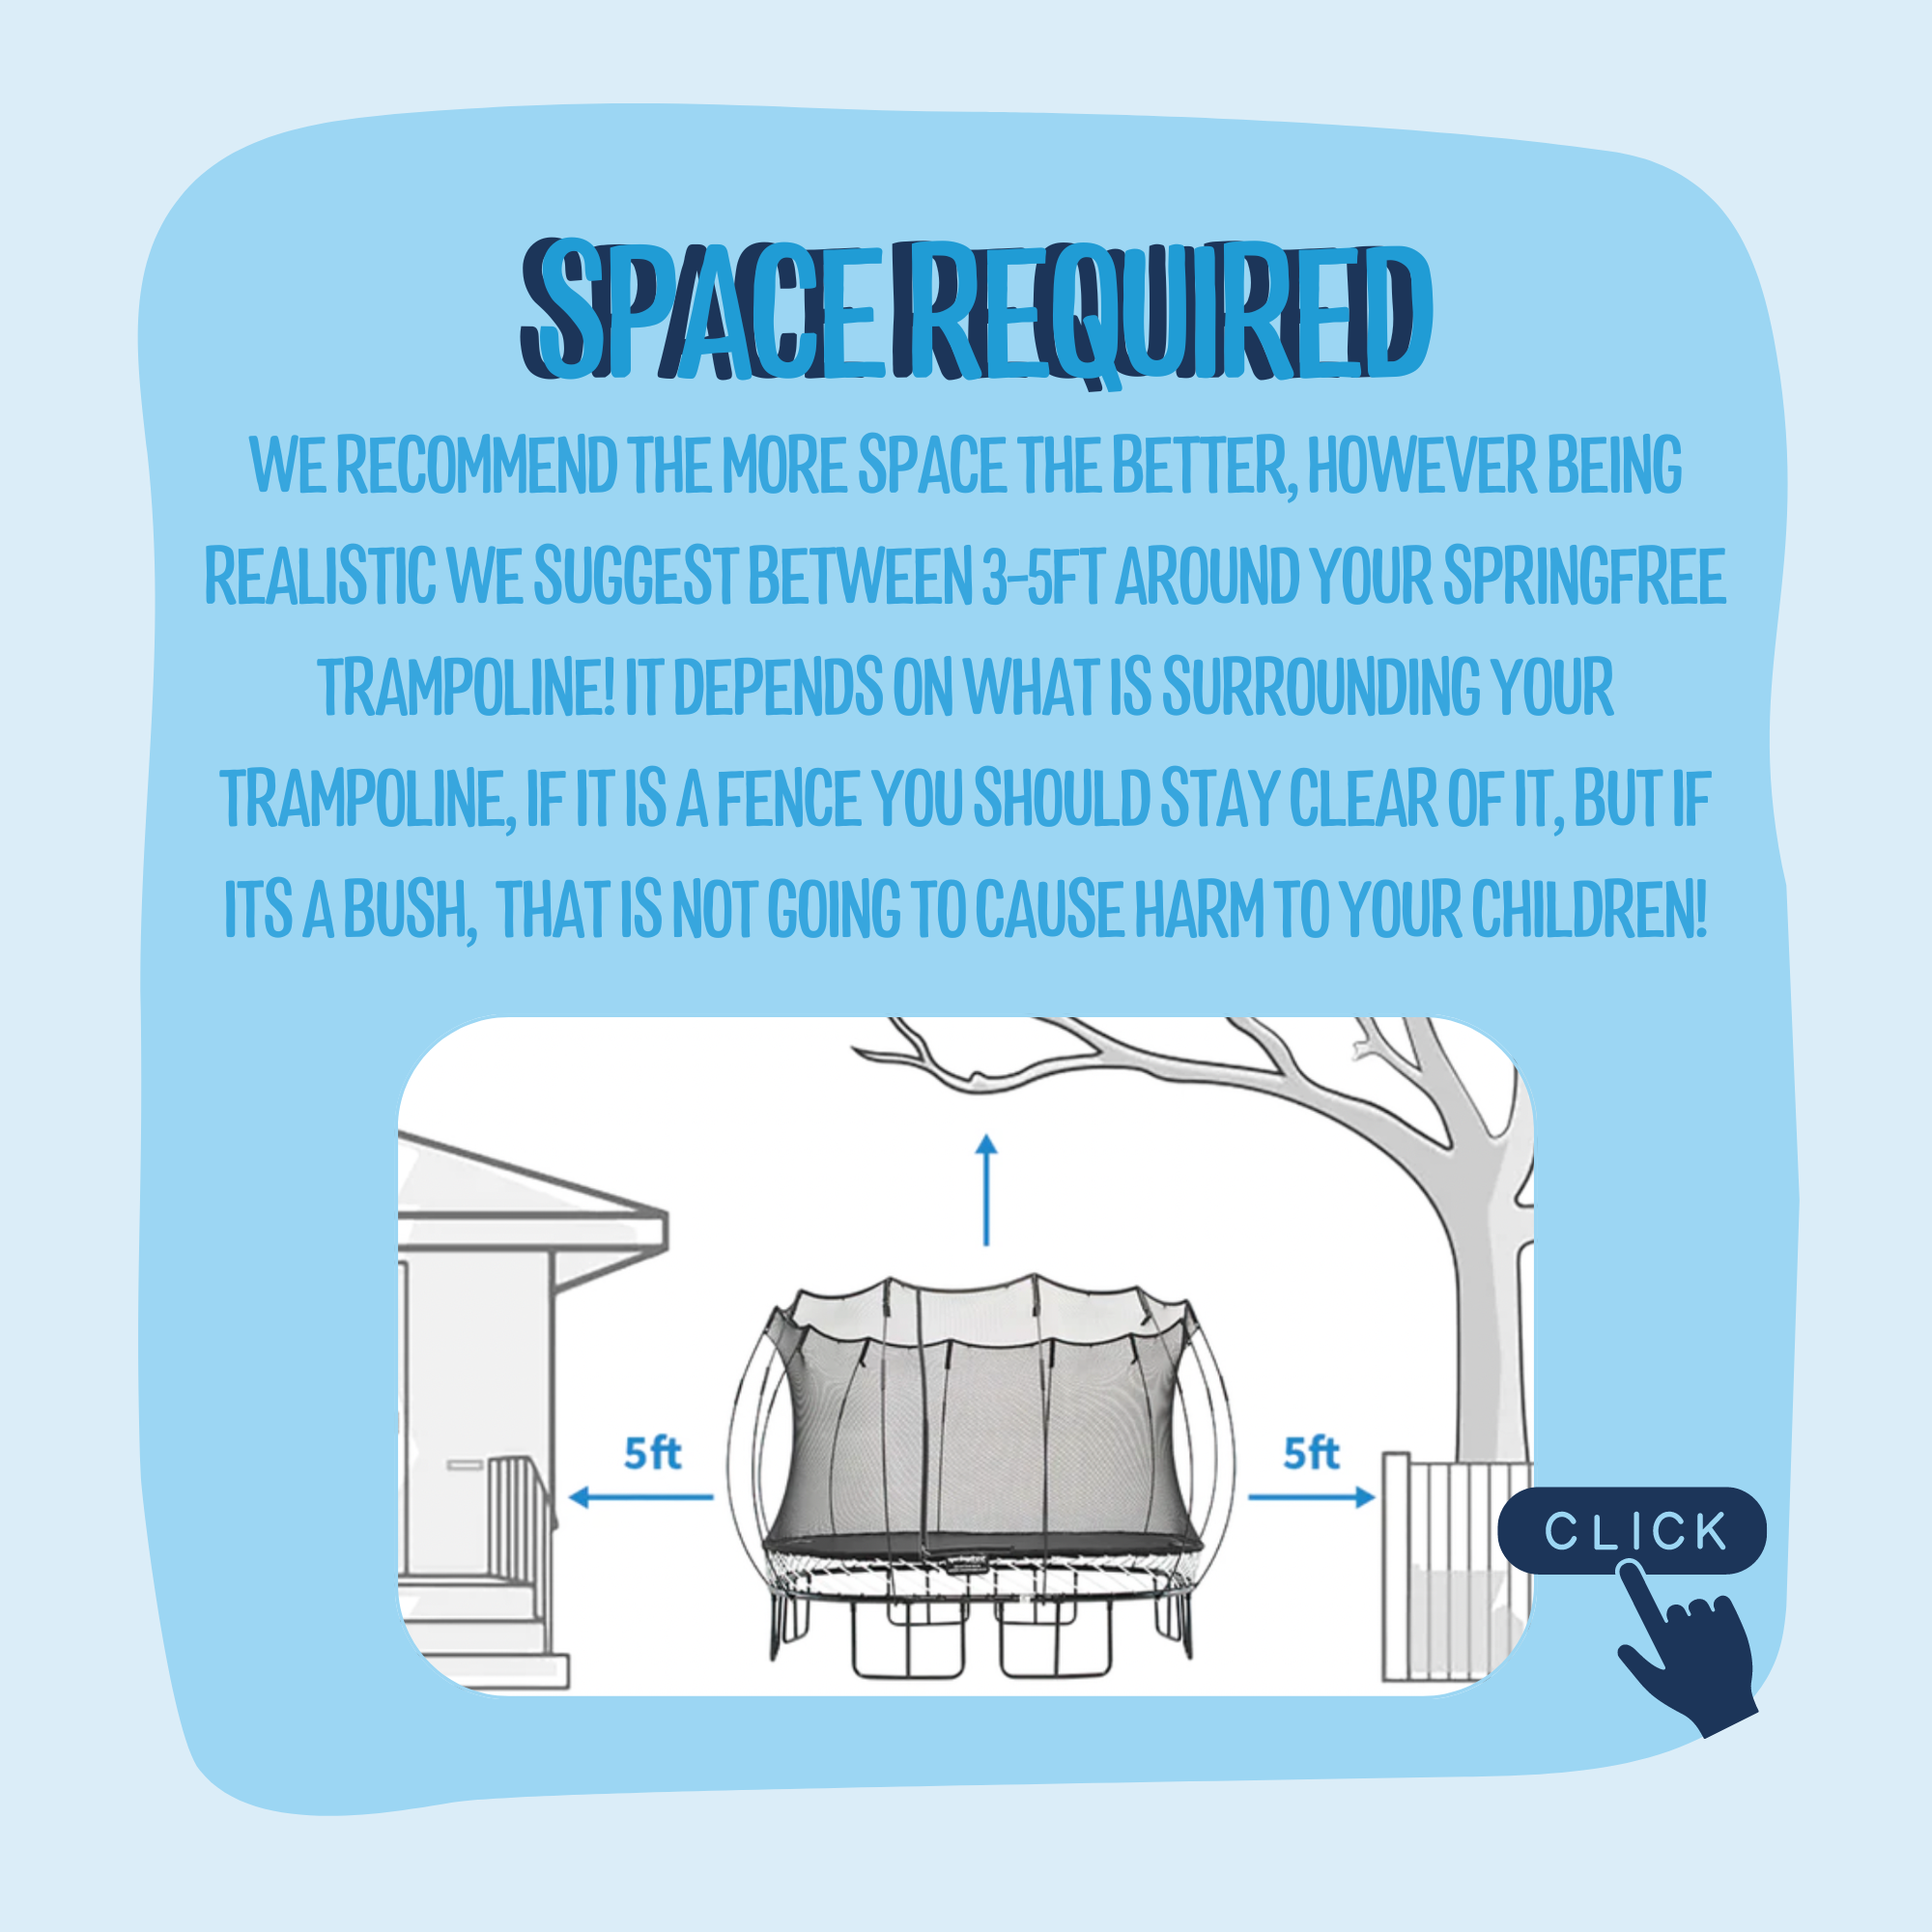 Space recommended for a Springfree Trampoline